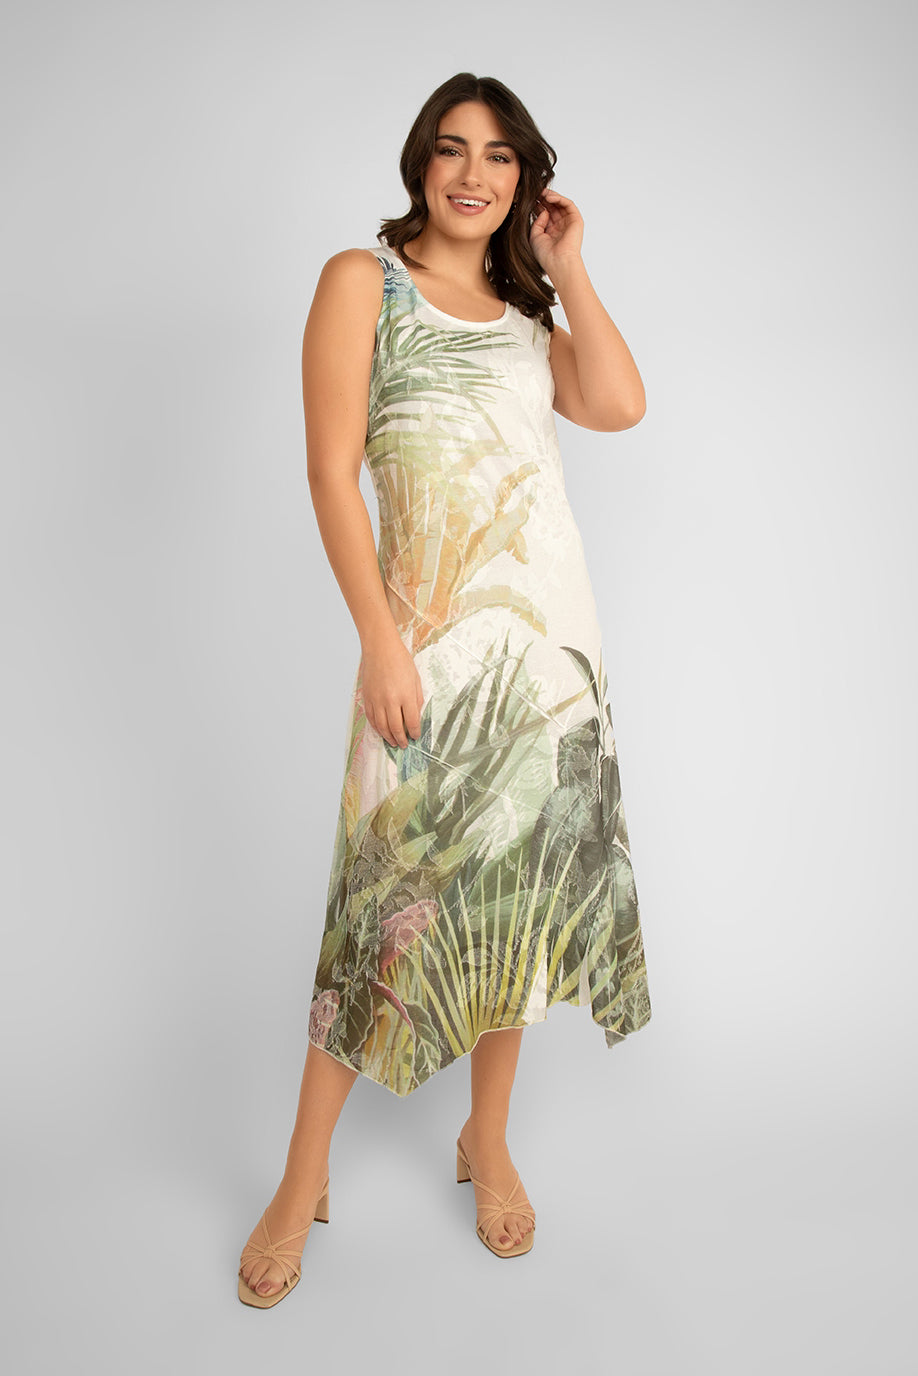 Front view of Picadilly (JC683SK) Women's Sleeveless Jacquard Printed Midi Dress in Artichoke Green Floral Print